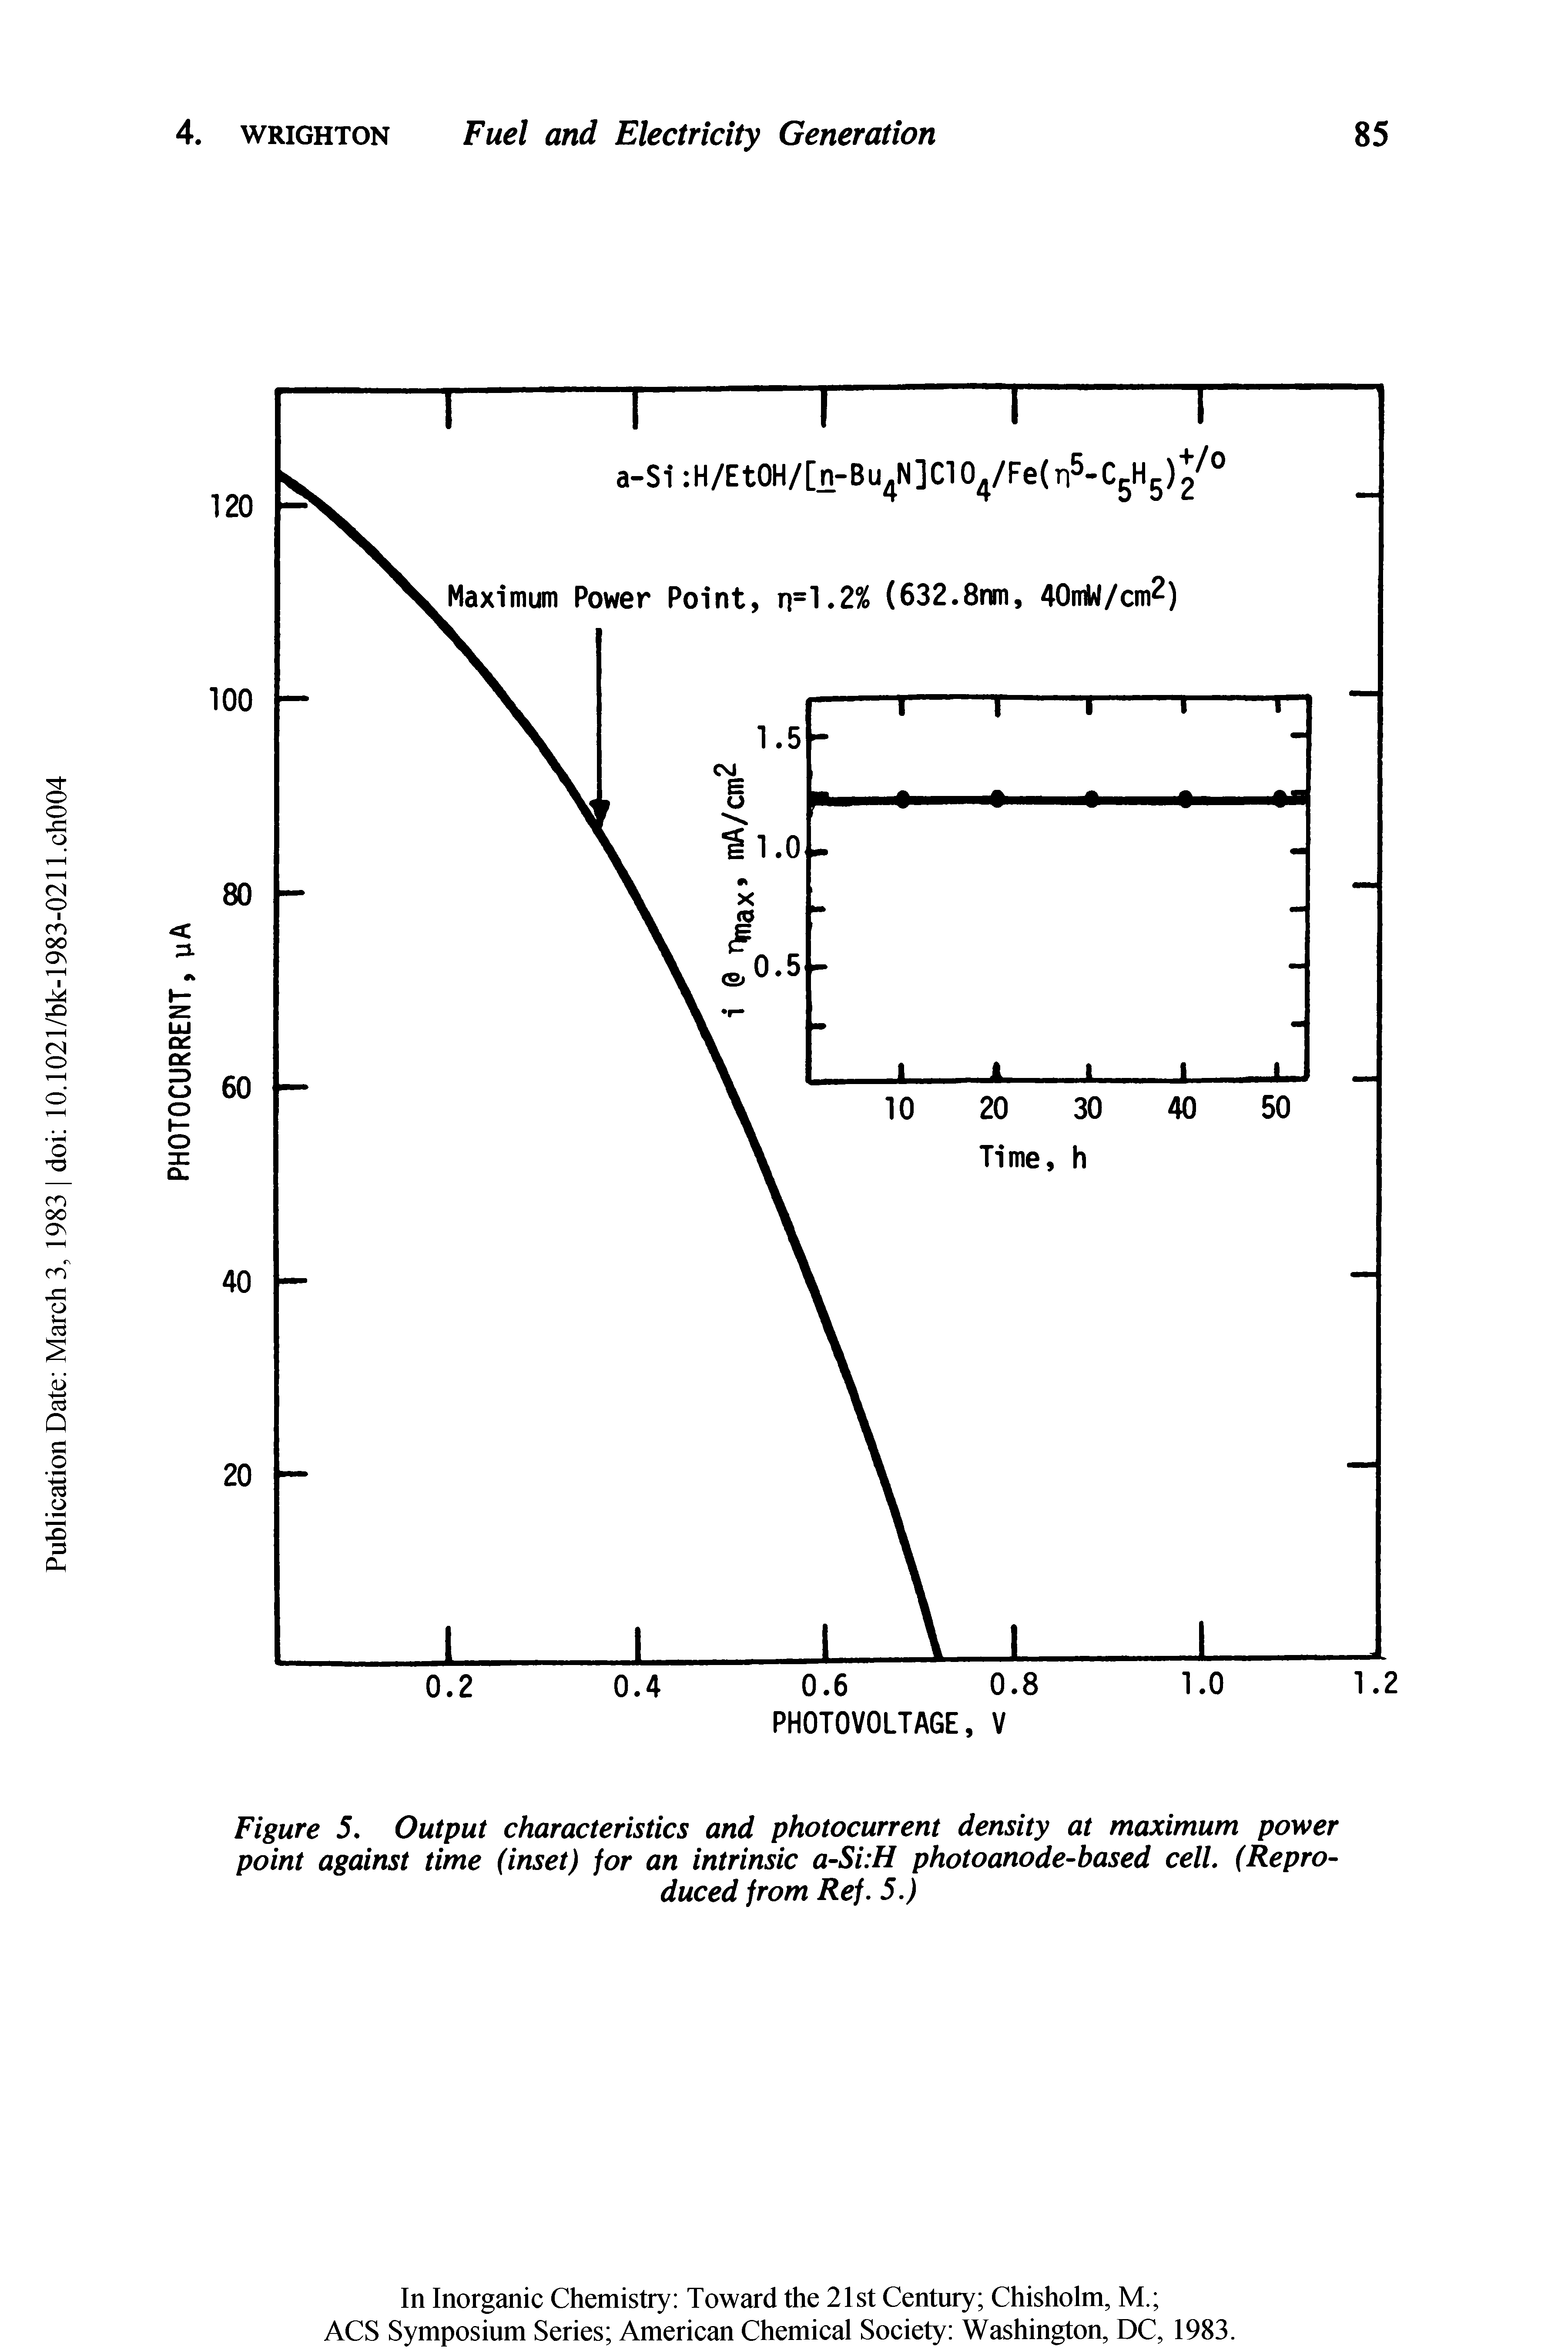 Figure 5. Output characteristics and photocurrent density at maximum power point against time (inset) for an intrinsic a-Si H photoanode-based cell. (Reproduced from Ref. 5.)...